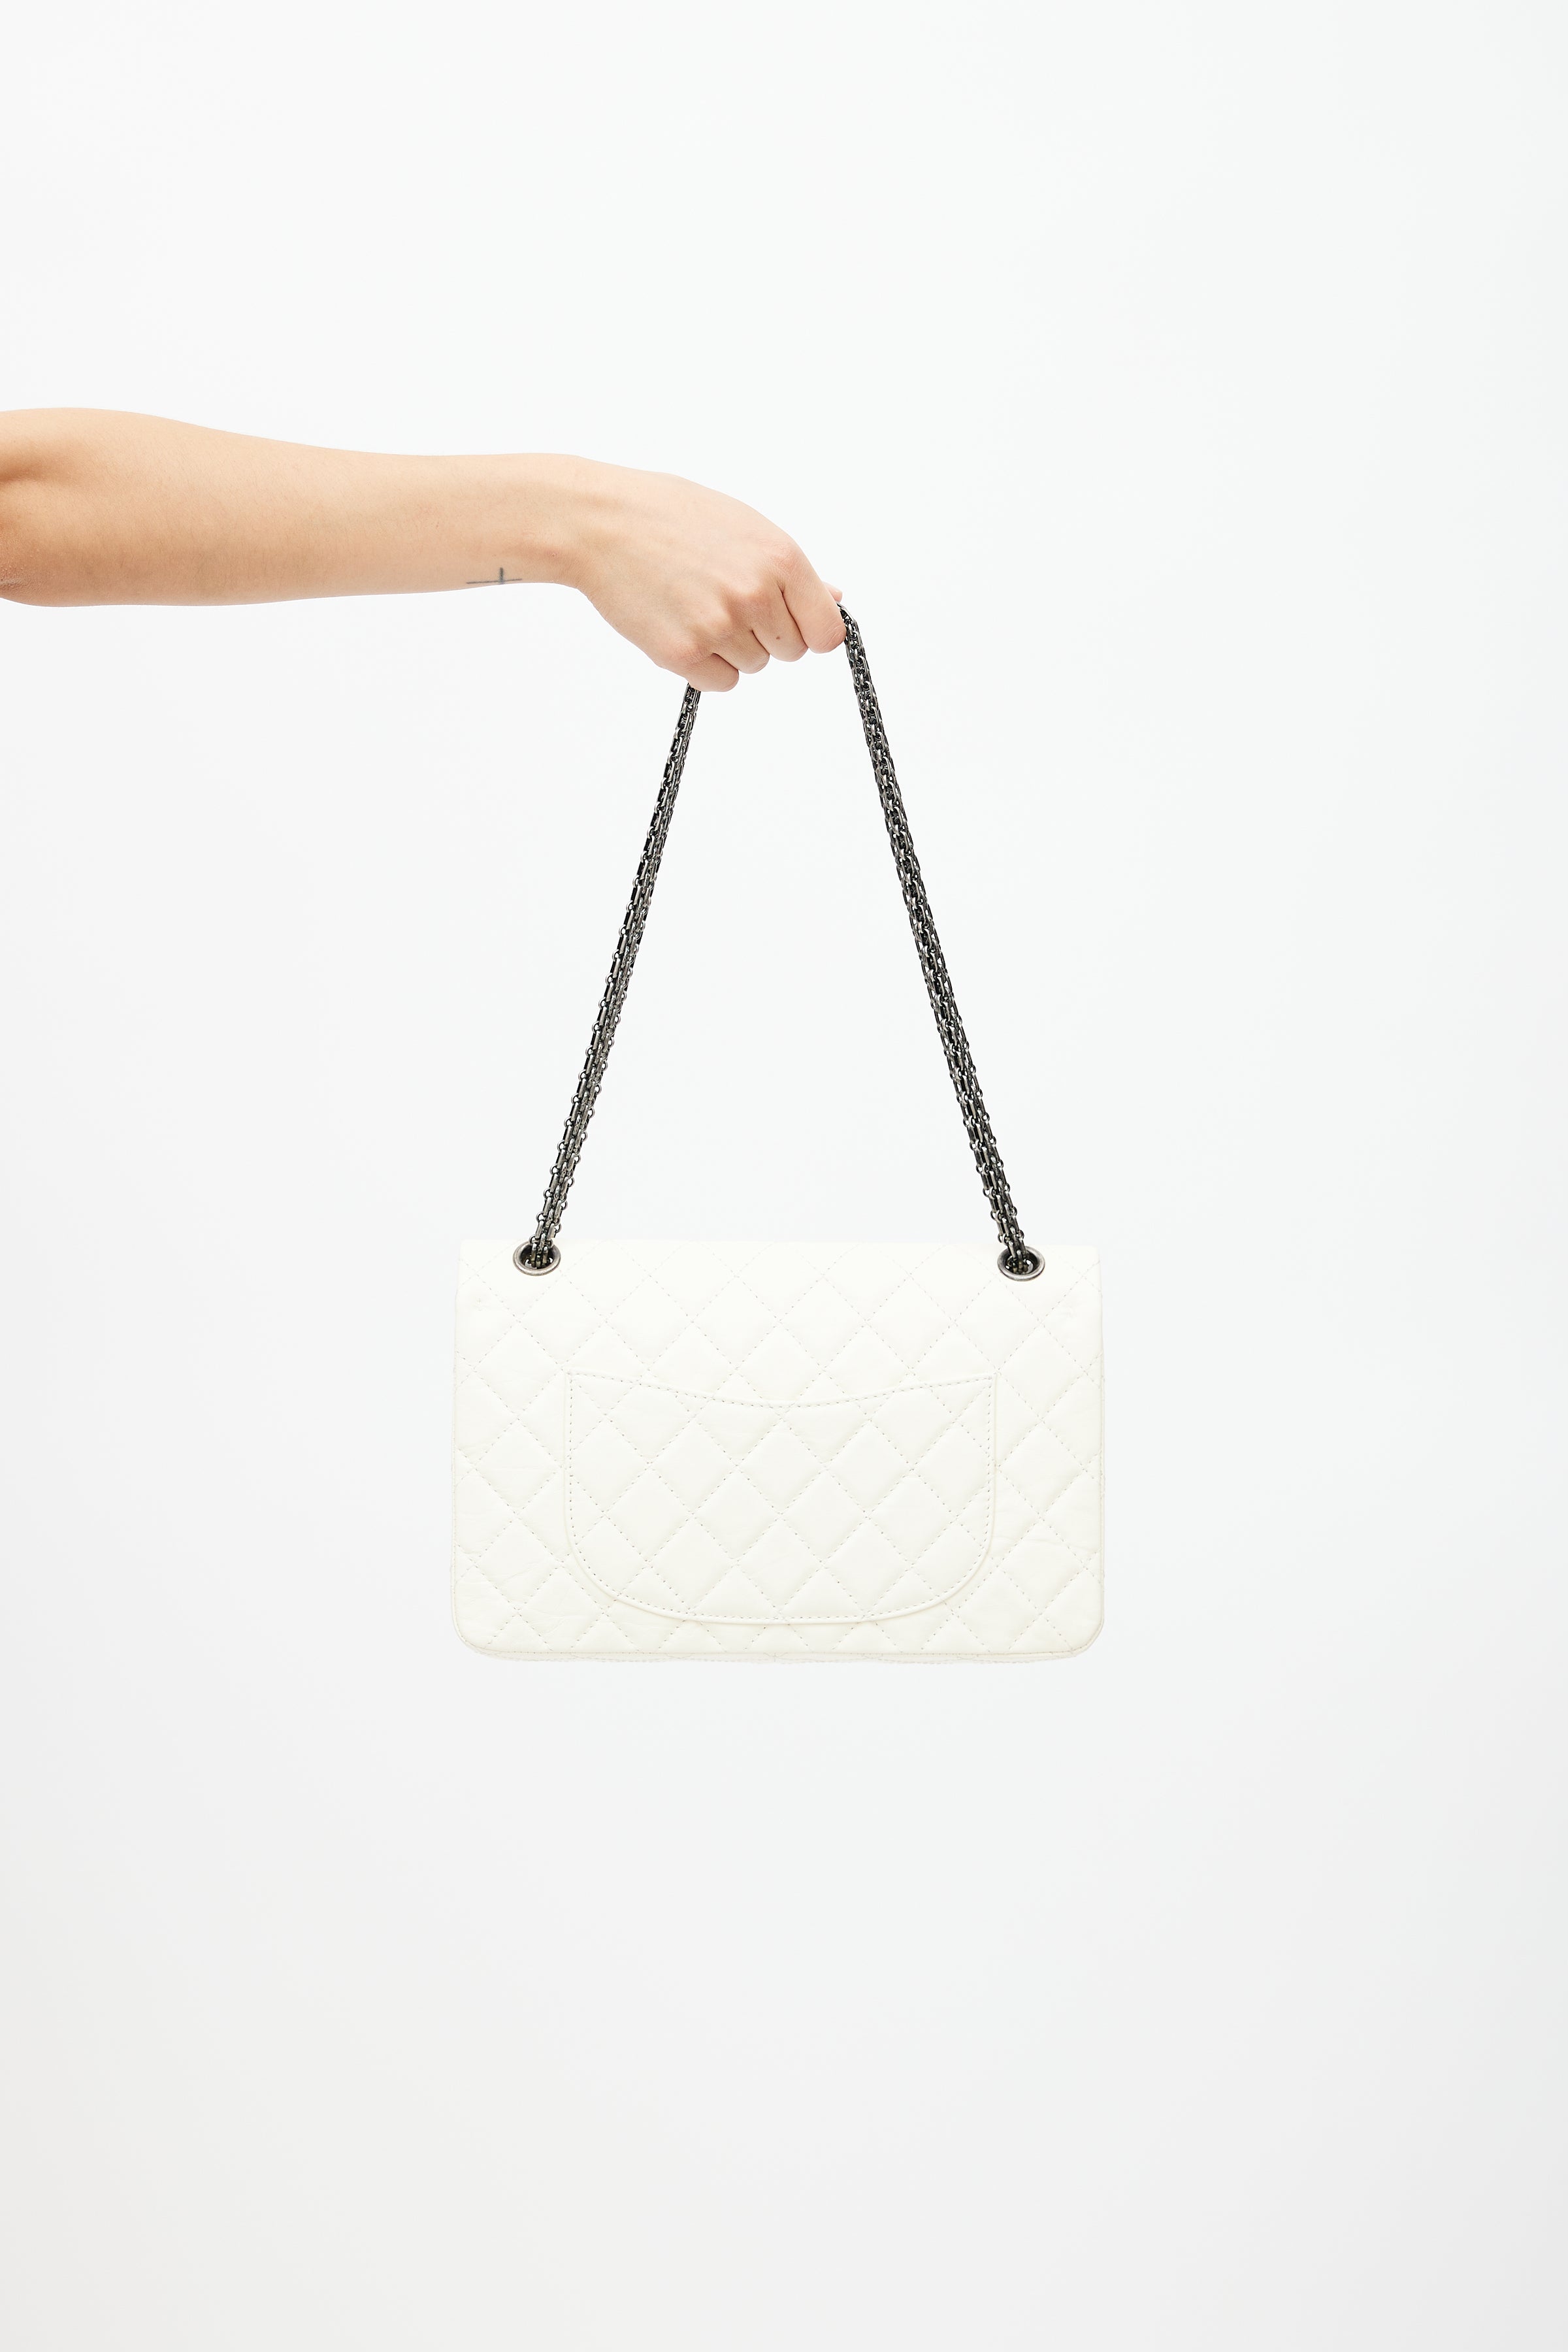 Chanel // 2012 Cream Quilted Leather 2.55 Reissue 226 Shoulder Bag – VSP  Consignment